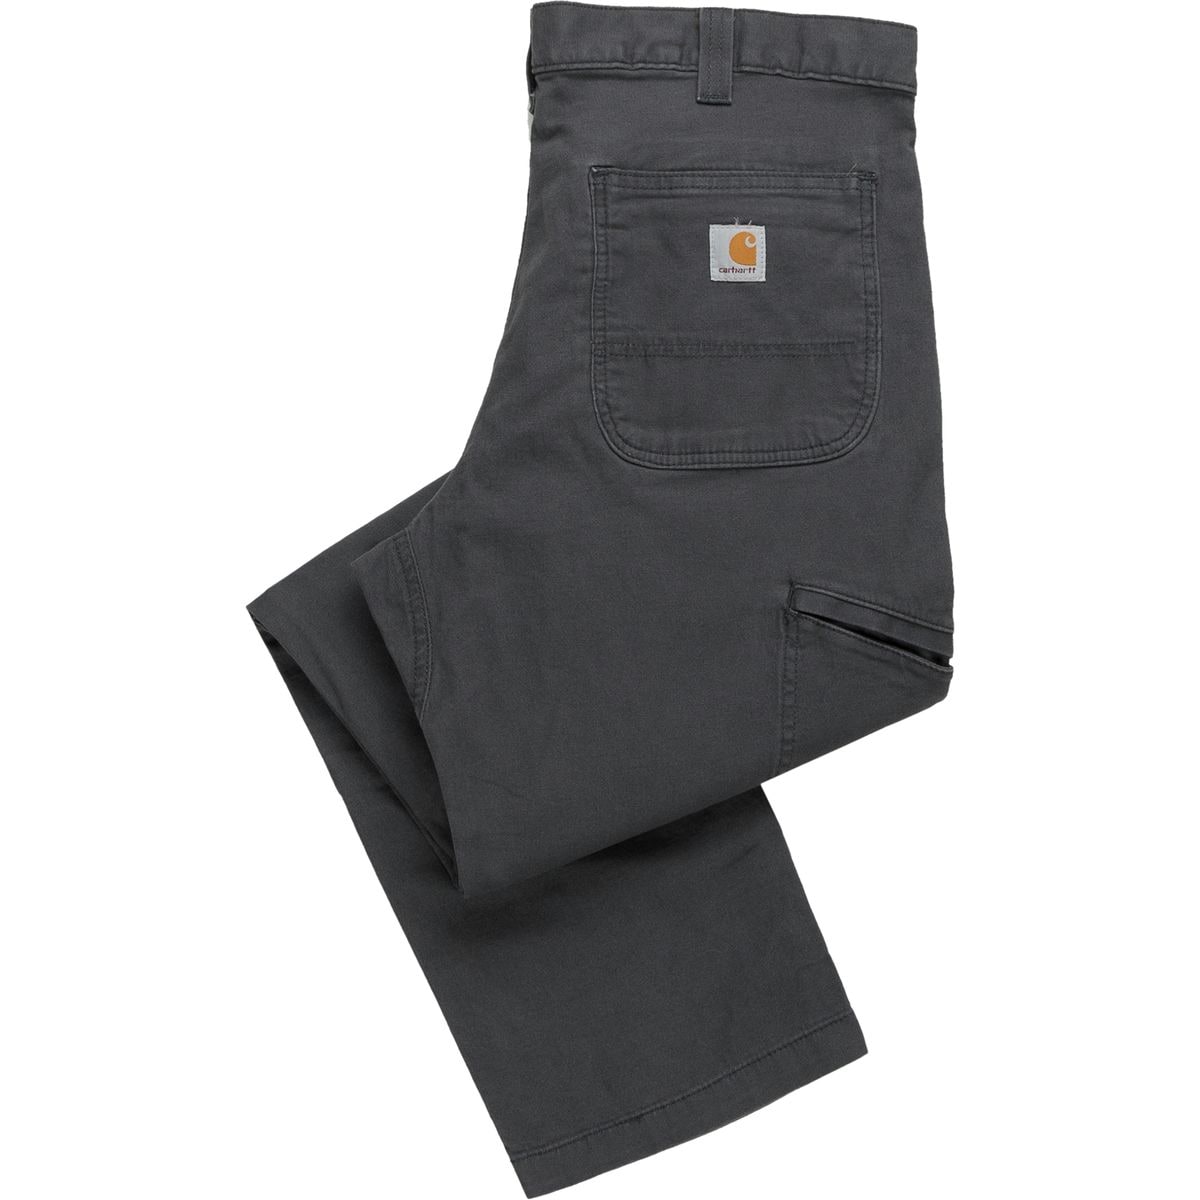 Carhartt Rugged Flex Rigby Double-Front Utility Pant - Men's